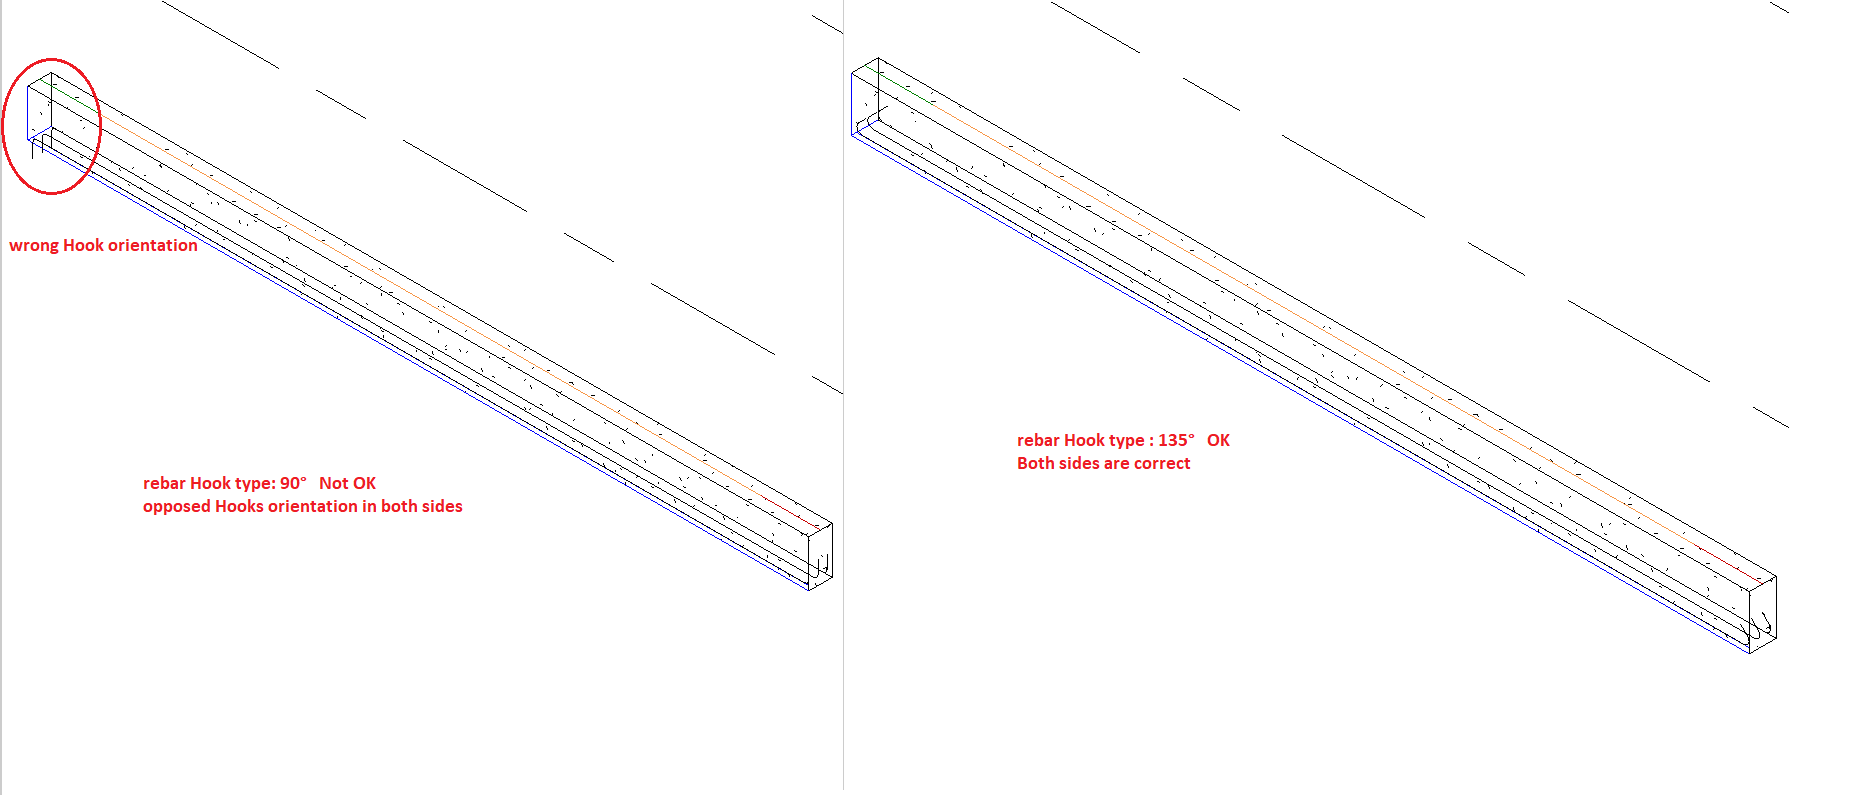 Solved: Beam's wrong rebar Hook orientation - Autodesk Community - Revit  Products